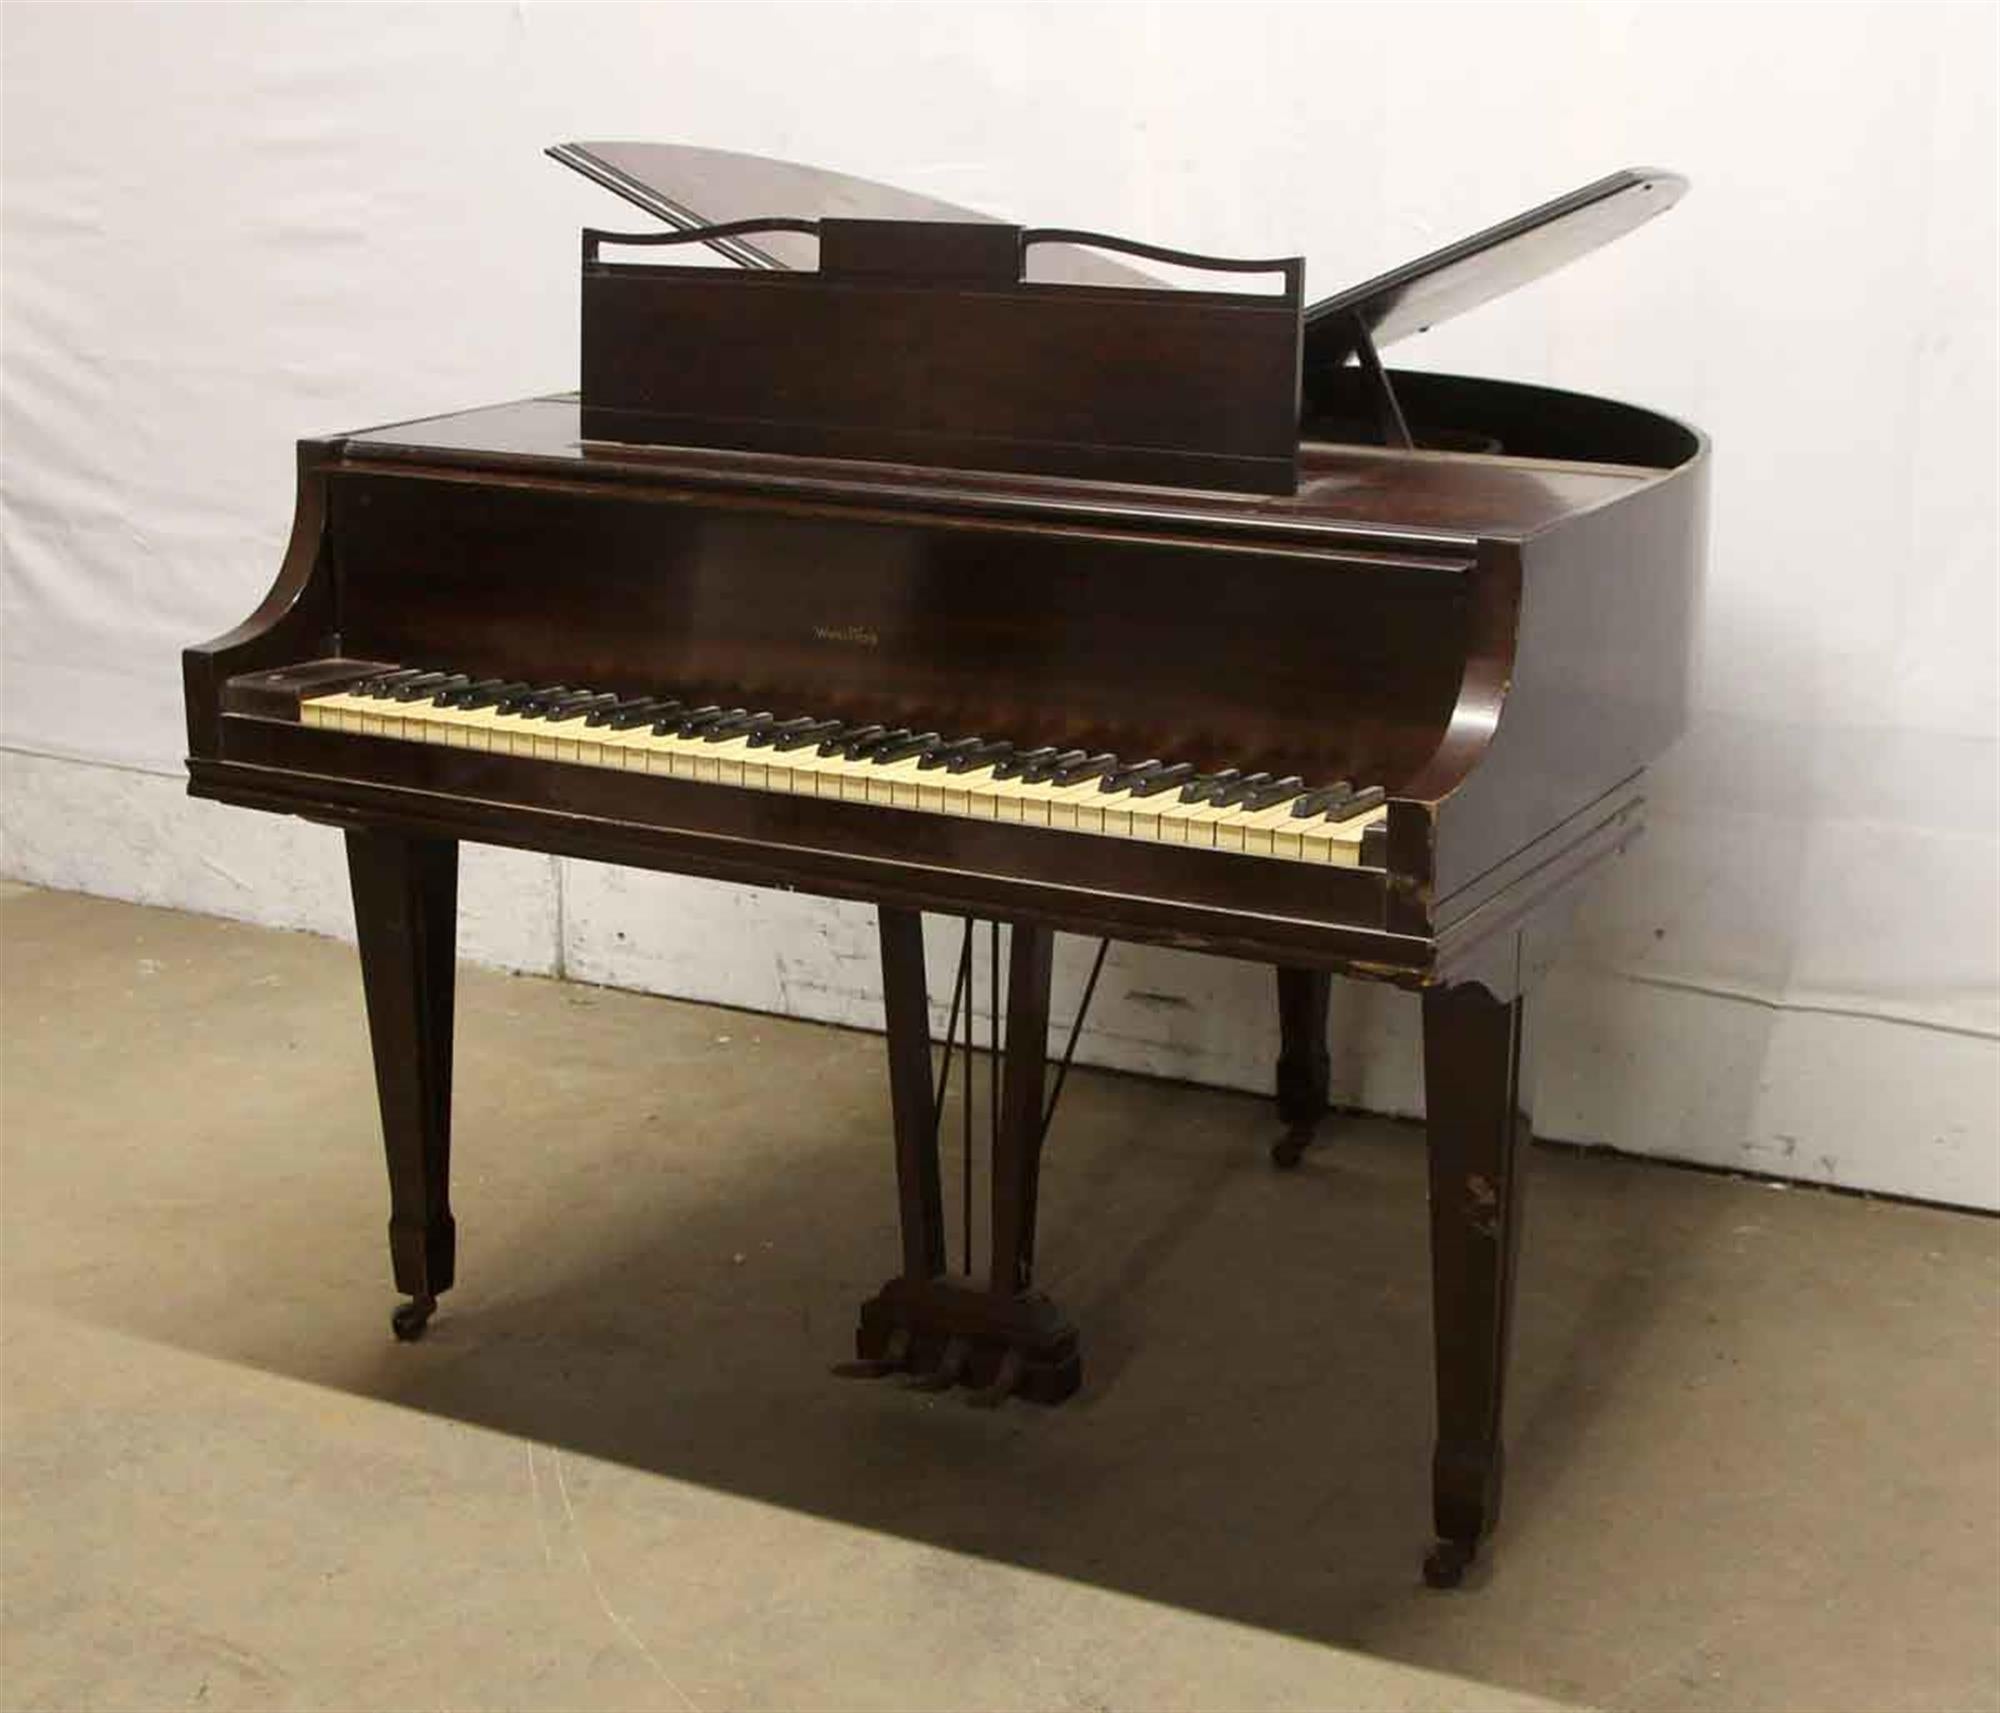 Rare butterfly baby grand piano built by the Rudolph Wurlitzer Piano & Organ Company in 1937. Wurlitzer built a limited number of these piano's during the 1930s and 1940s. Sought after by collectors and musicians alike. Needs restoration. This can